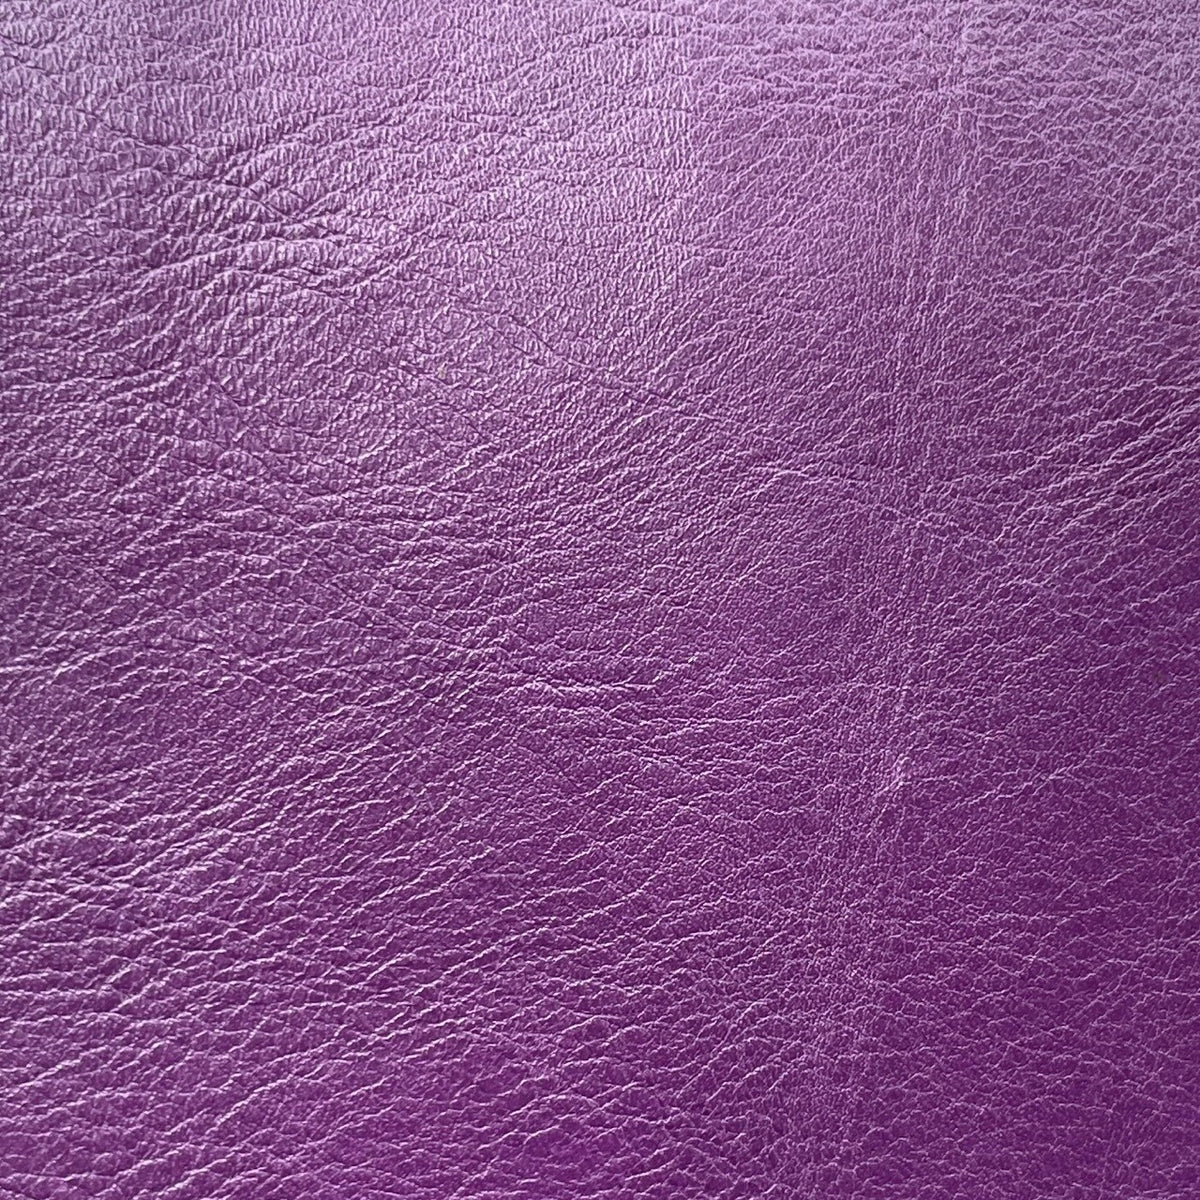 Olympia Cow Half Side | Violet | 1.5 mm | 10.5 sq.ft | From $160 ea.